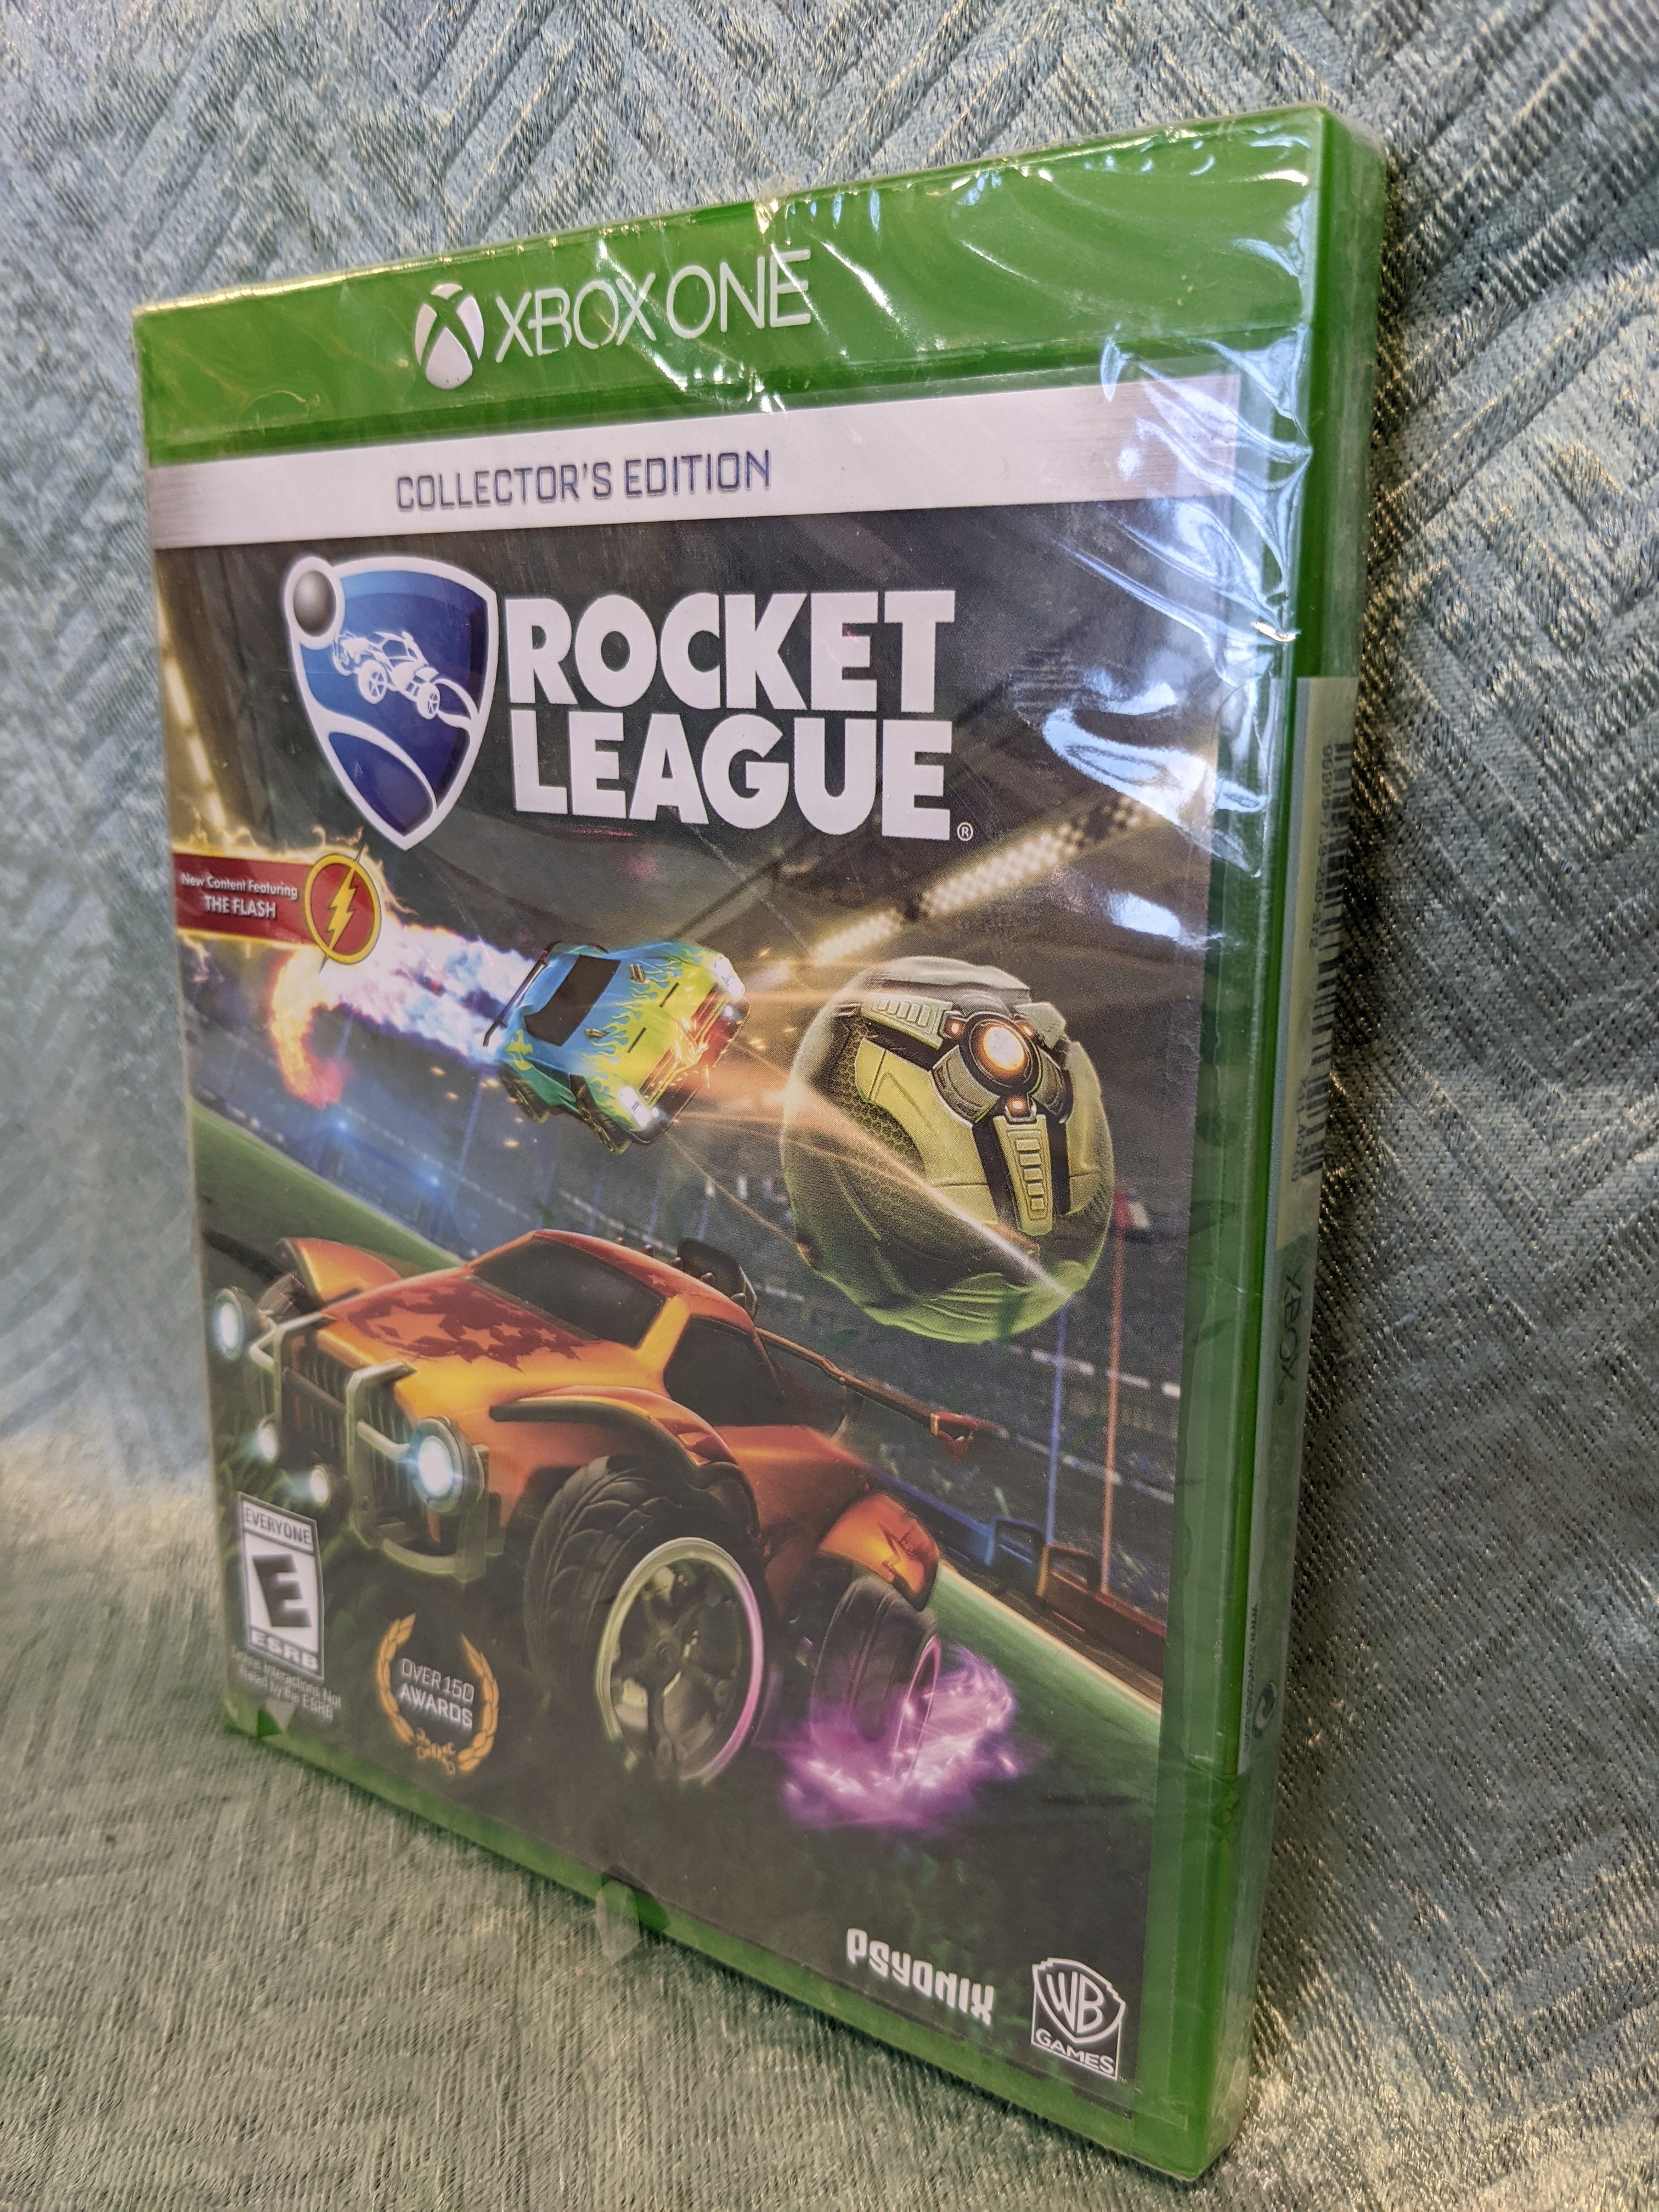 Rocket League: Collector's Edition - Xbox One (7594297327854)